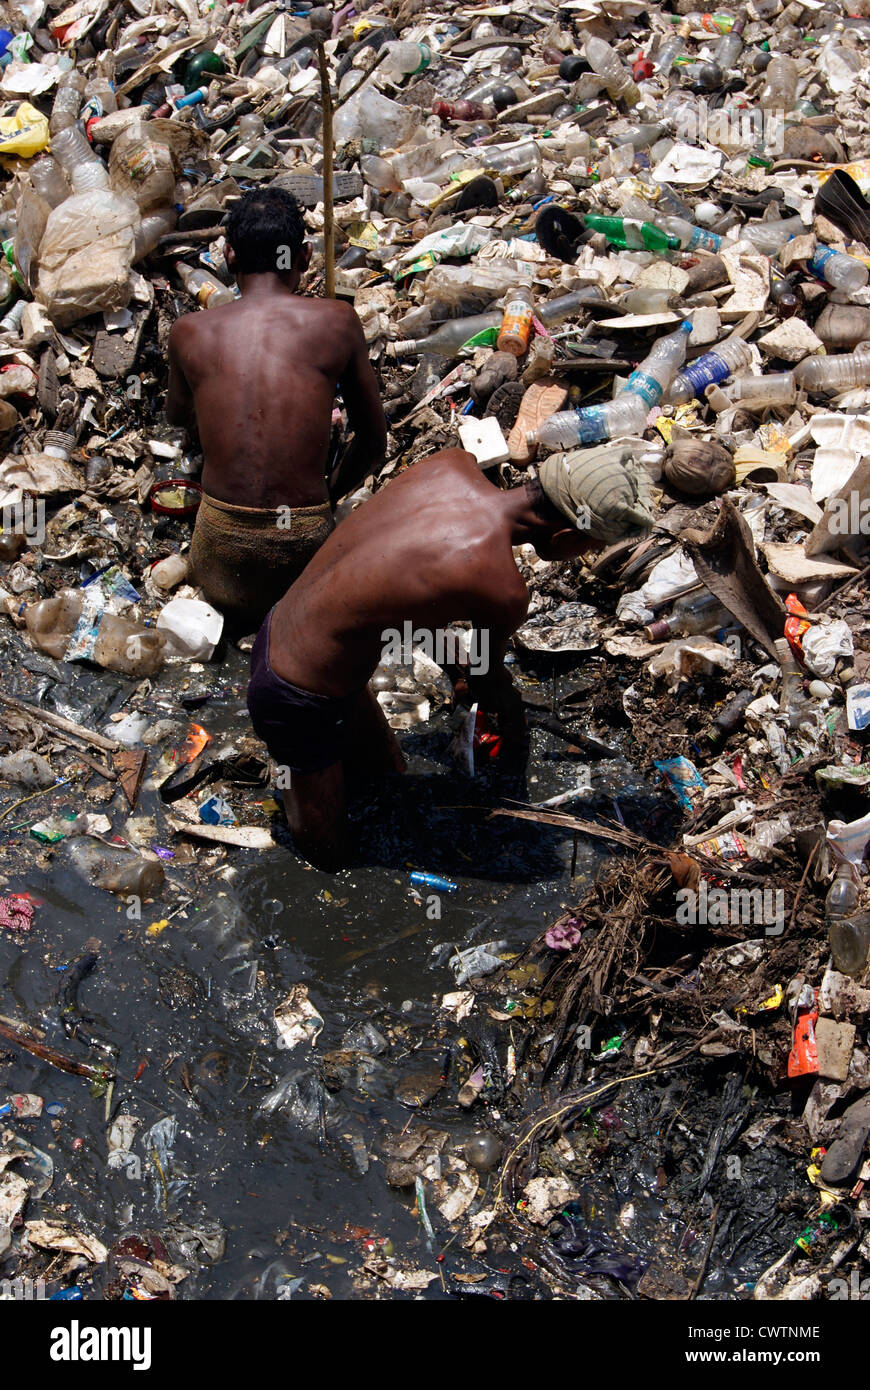 Workers Removing Plastic Waste from Contaminated Sewage filled infectious river flowing through Trivandrum city of Kerala India Stock Photo